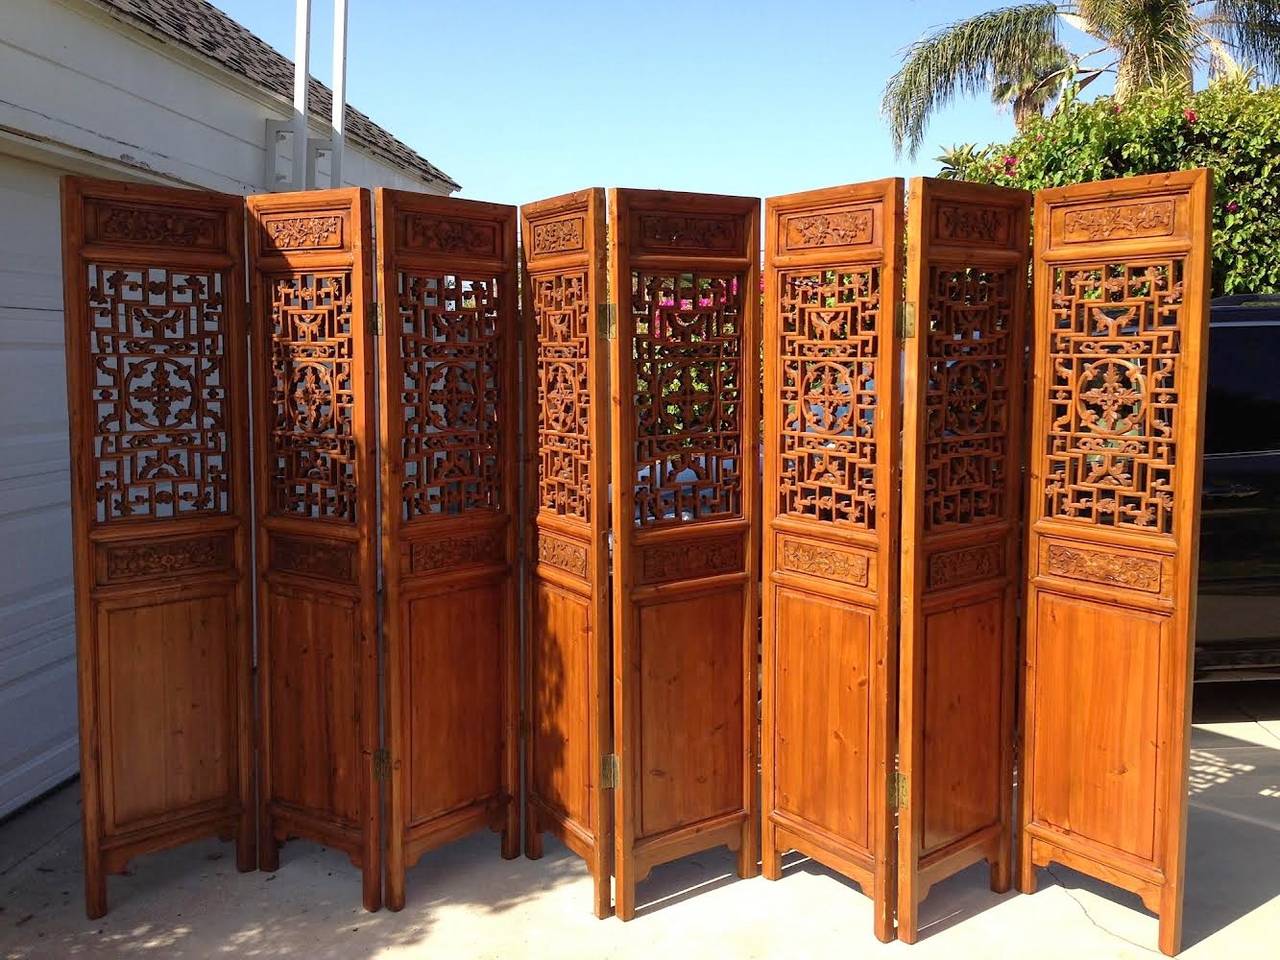 Beautiful Chinese antique cedar wood room divider. Eight panels. Can be used as a room divider or screen. 12 foot.